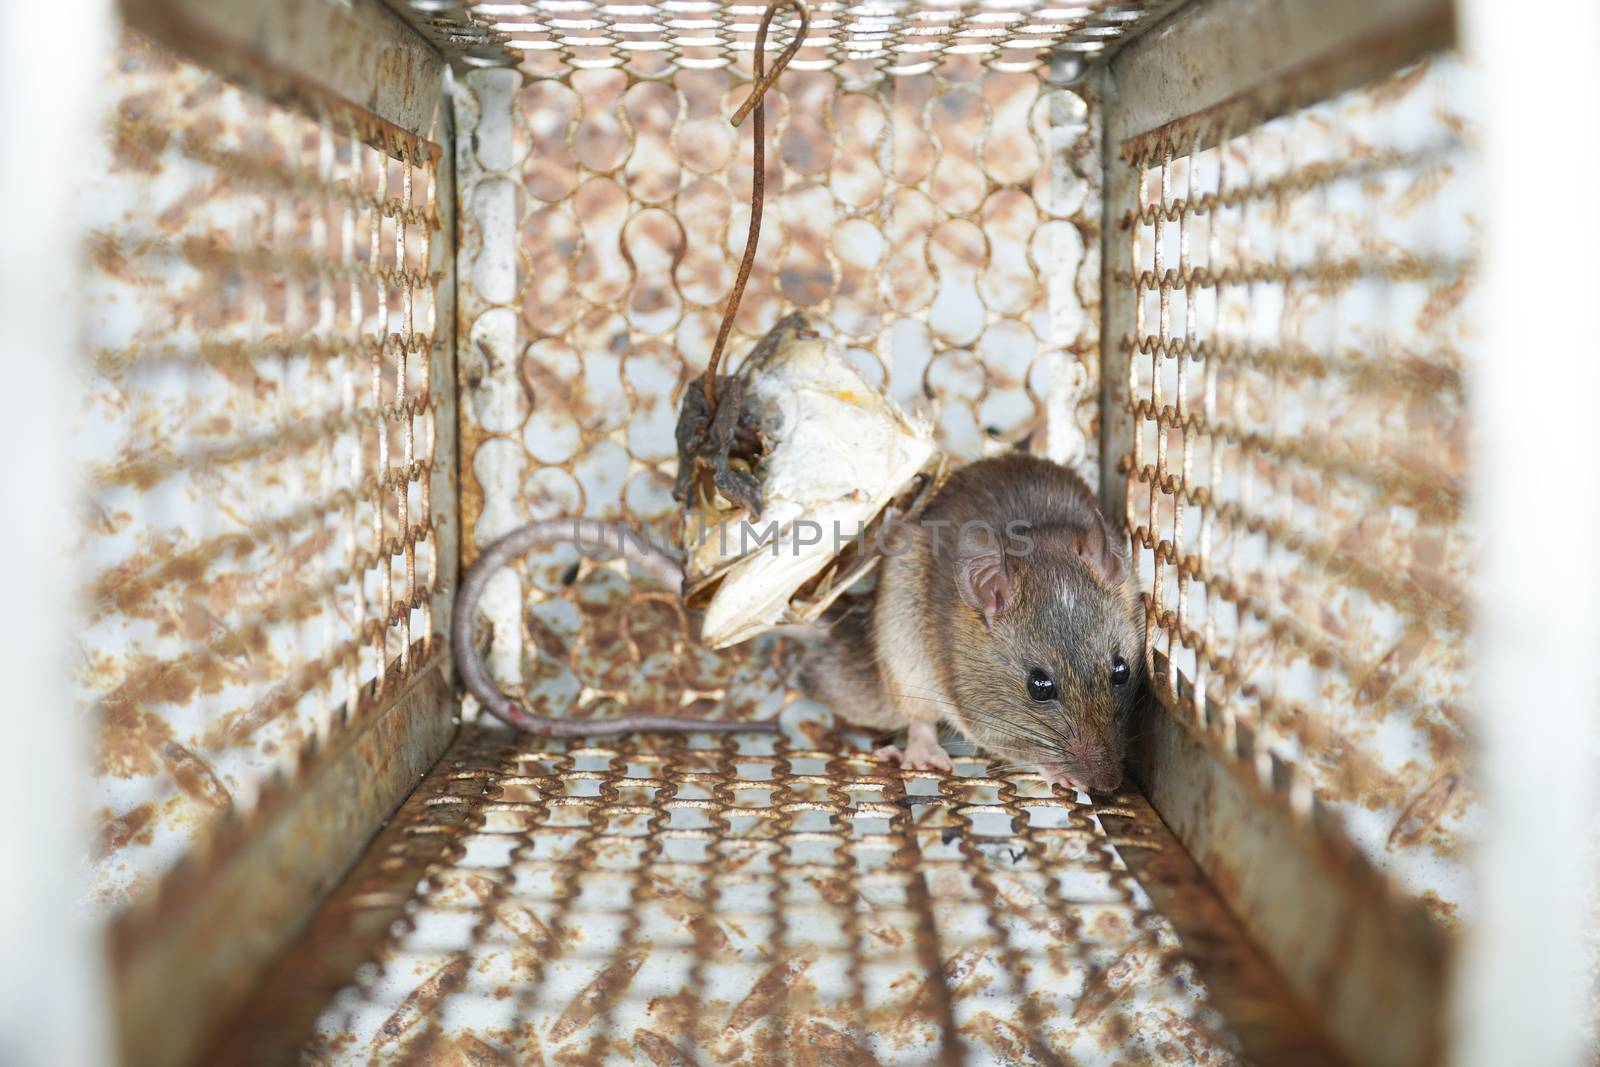 Close-up of a rat trapped in a mousetrap cage, Rodent control cage in house. by chiawth